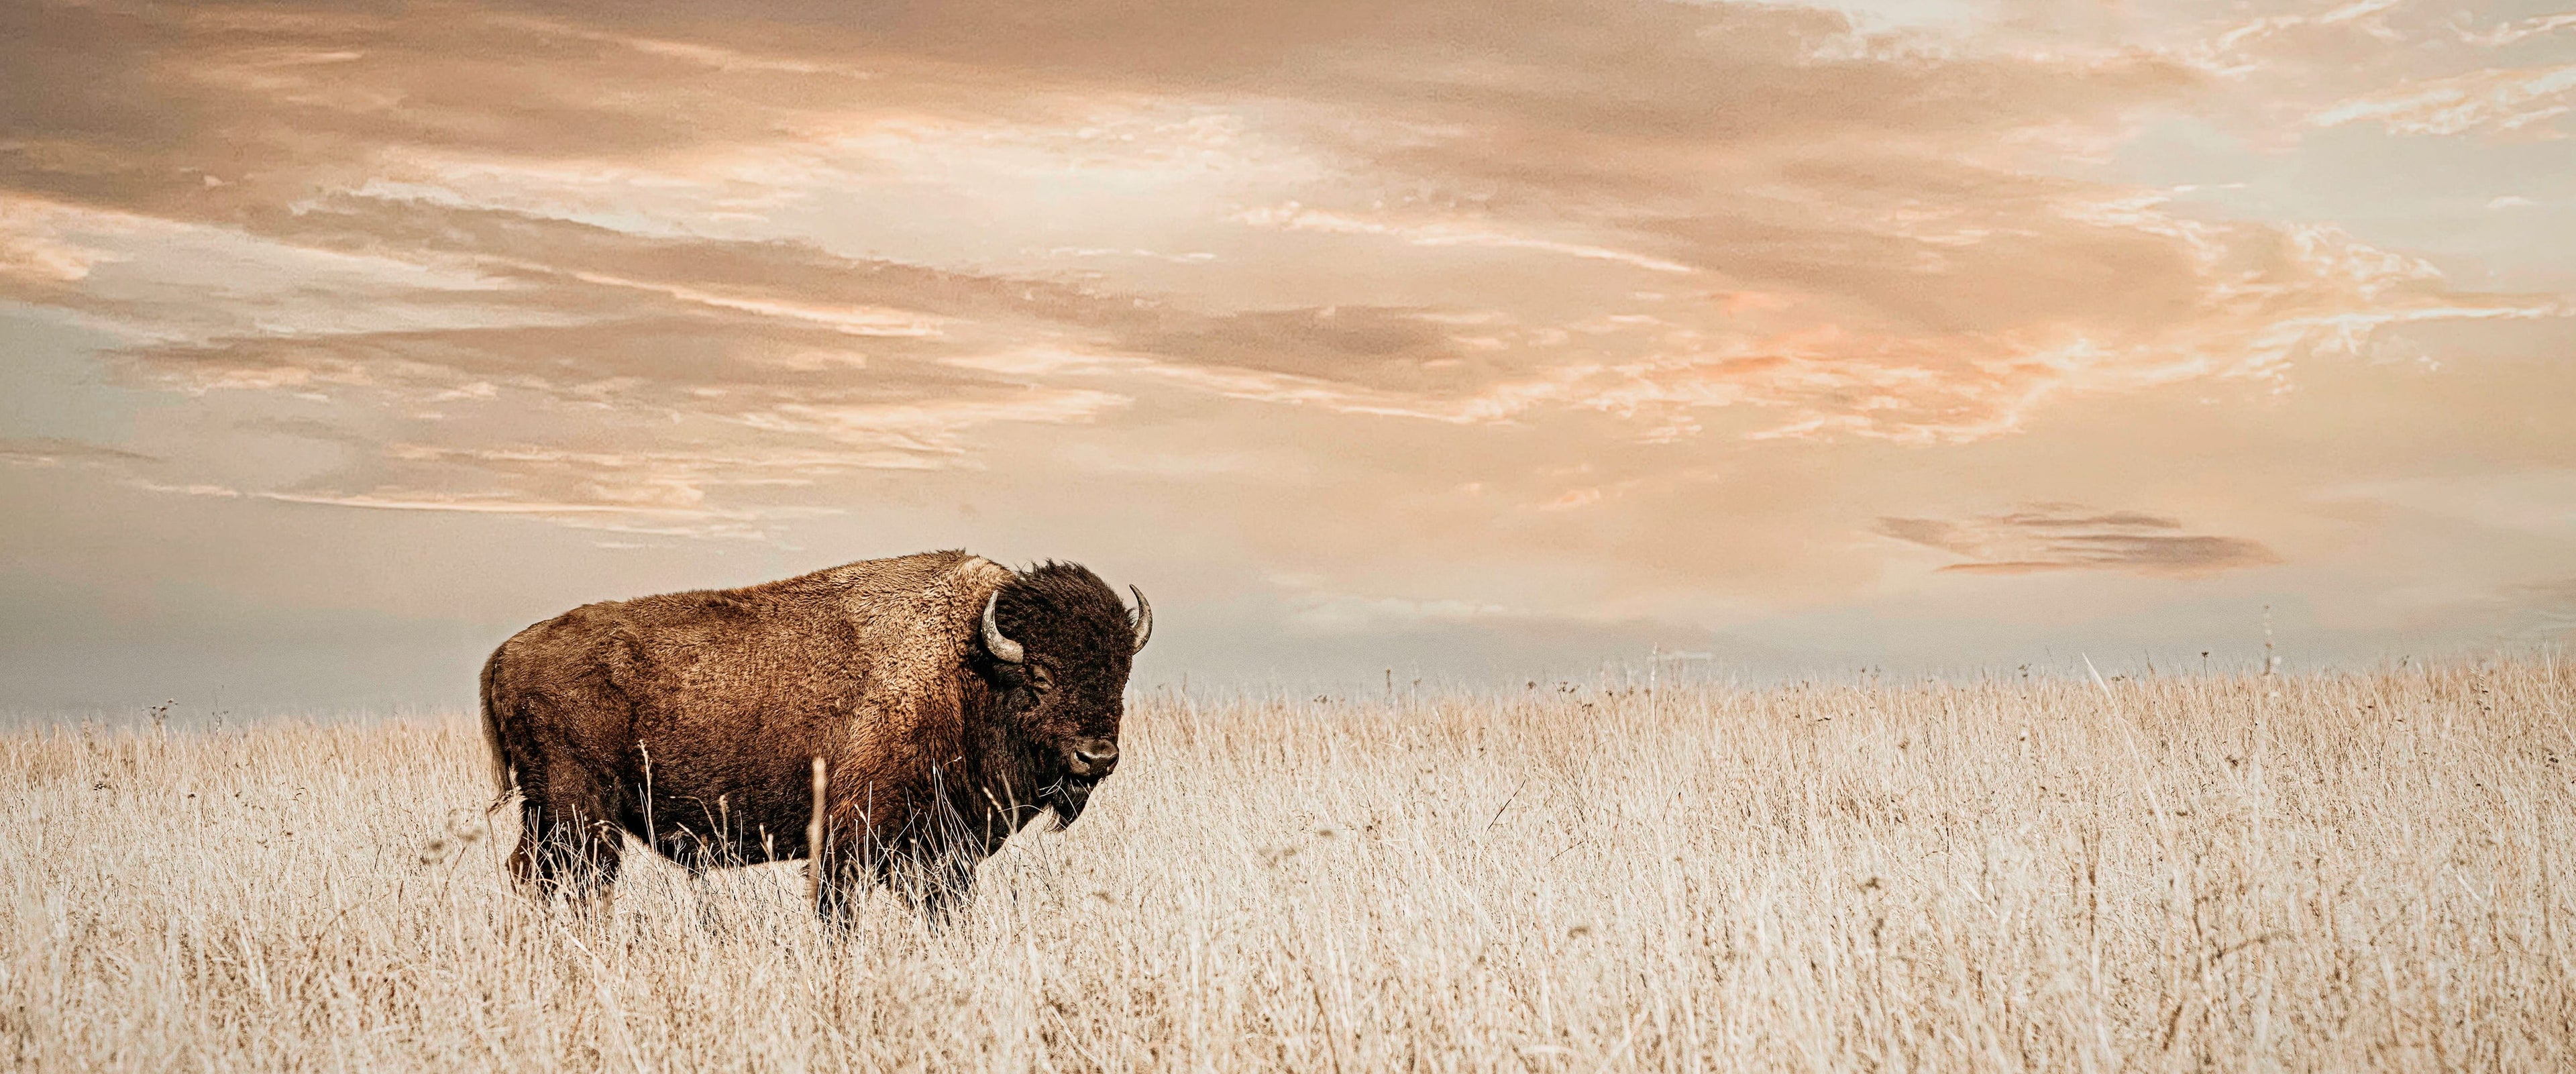 Bison or buffalo wall art canvas print for western or rustic decor.